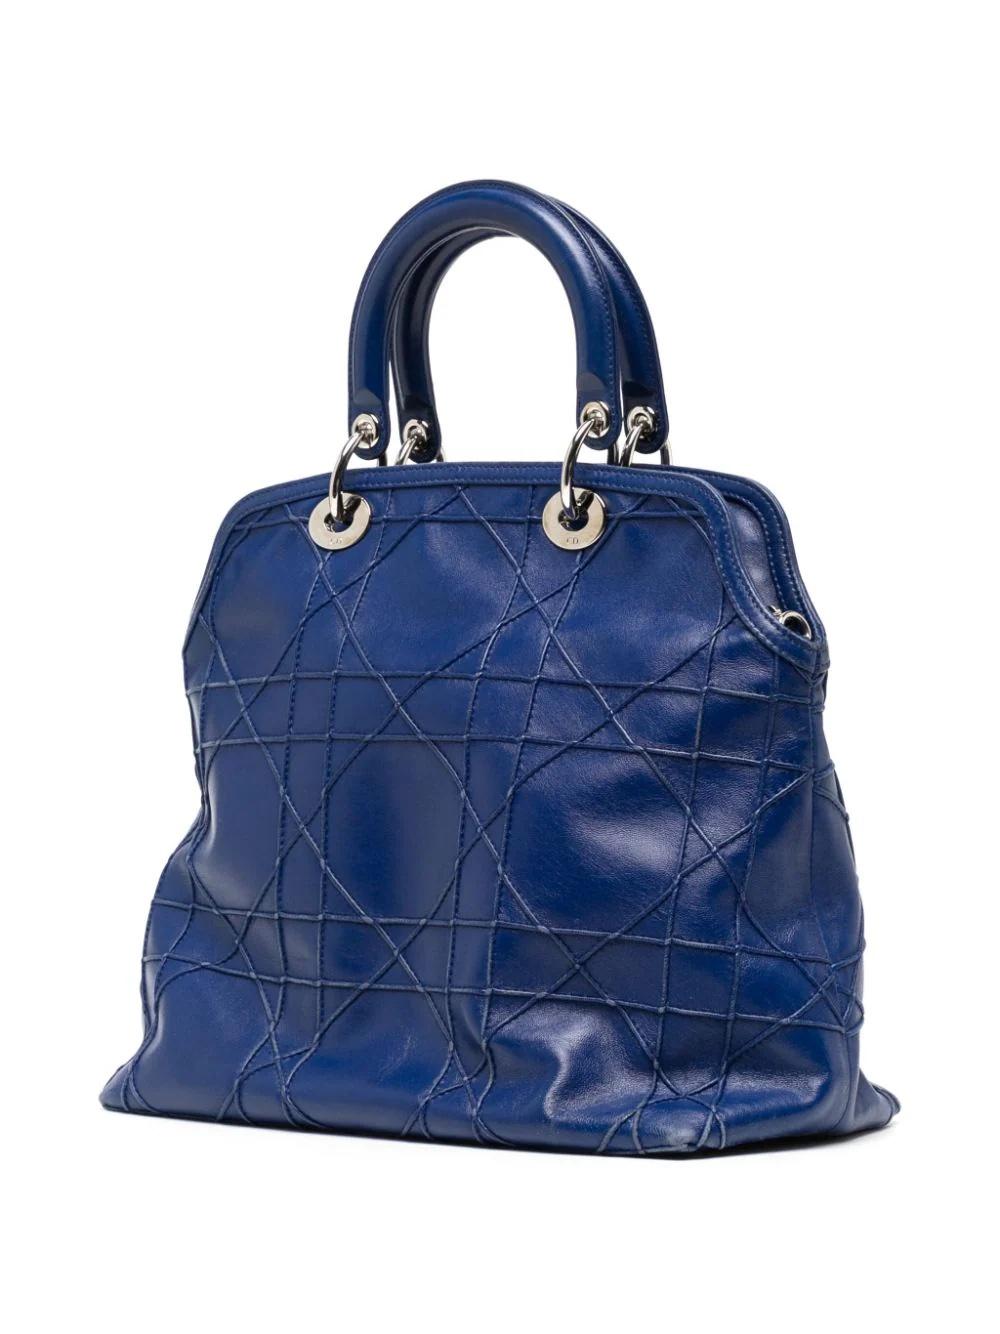 The navy-blue leather Granville tote from Christian Dior features the Cannage quilt design inspired by Napoléon II Cannage chairs. It is finished with the hallmark Dior letters charm in silver-tone hardware, adding a unique and charming